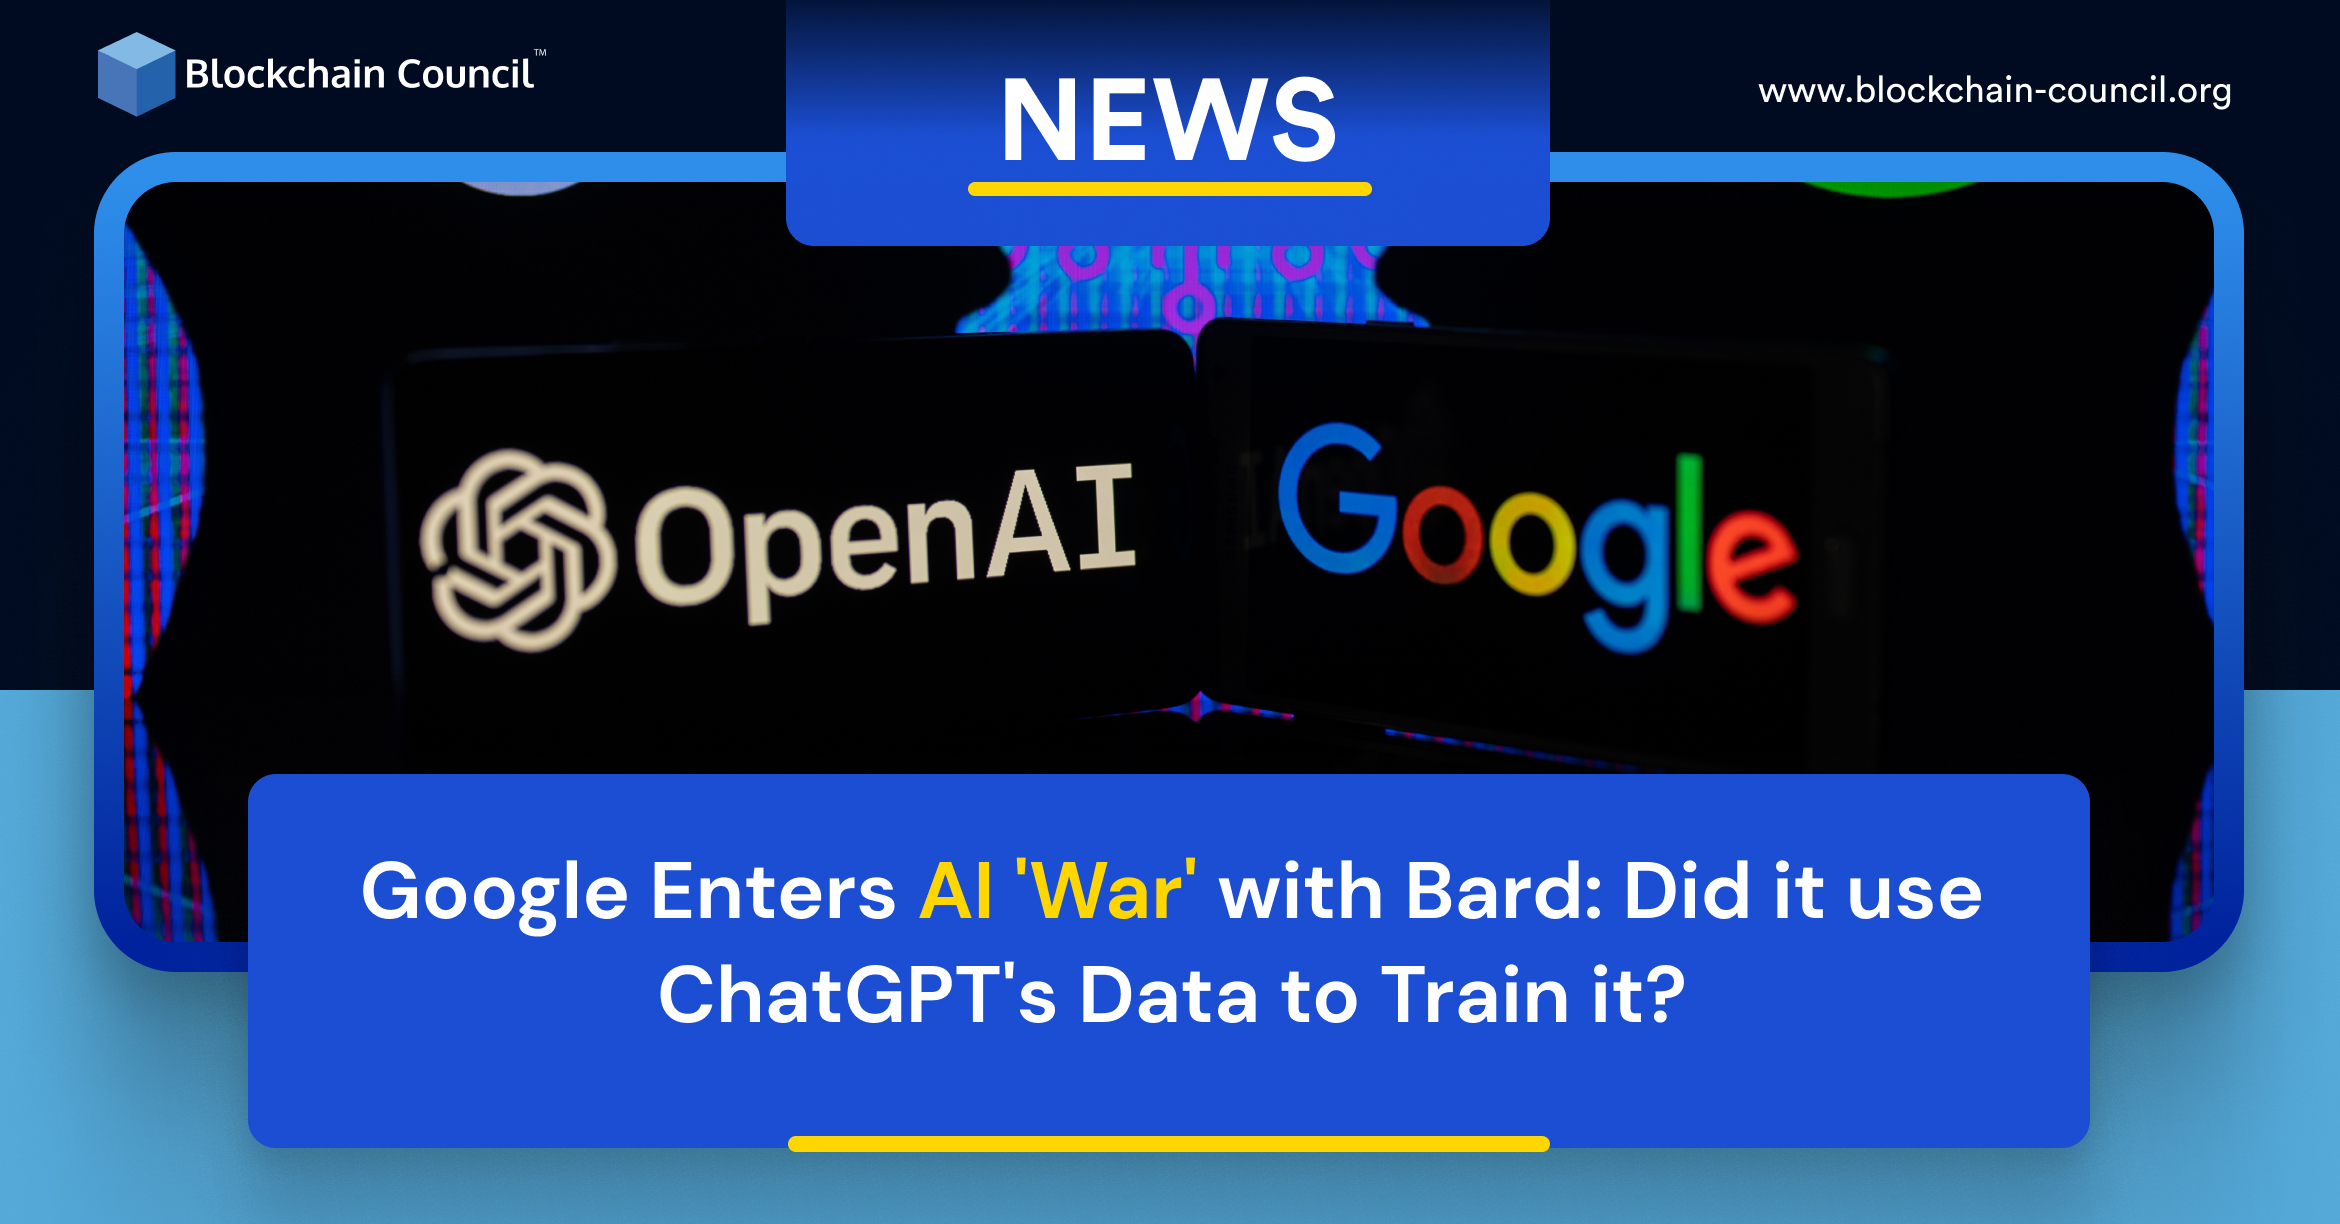 Google Enters AI ‘War’ with Bard: Did it use ChatGPT’s Data to Train it?